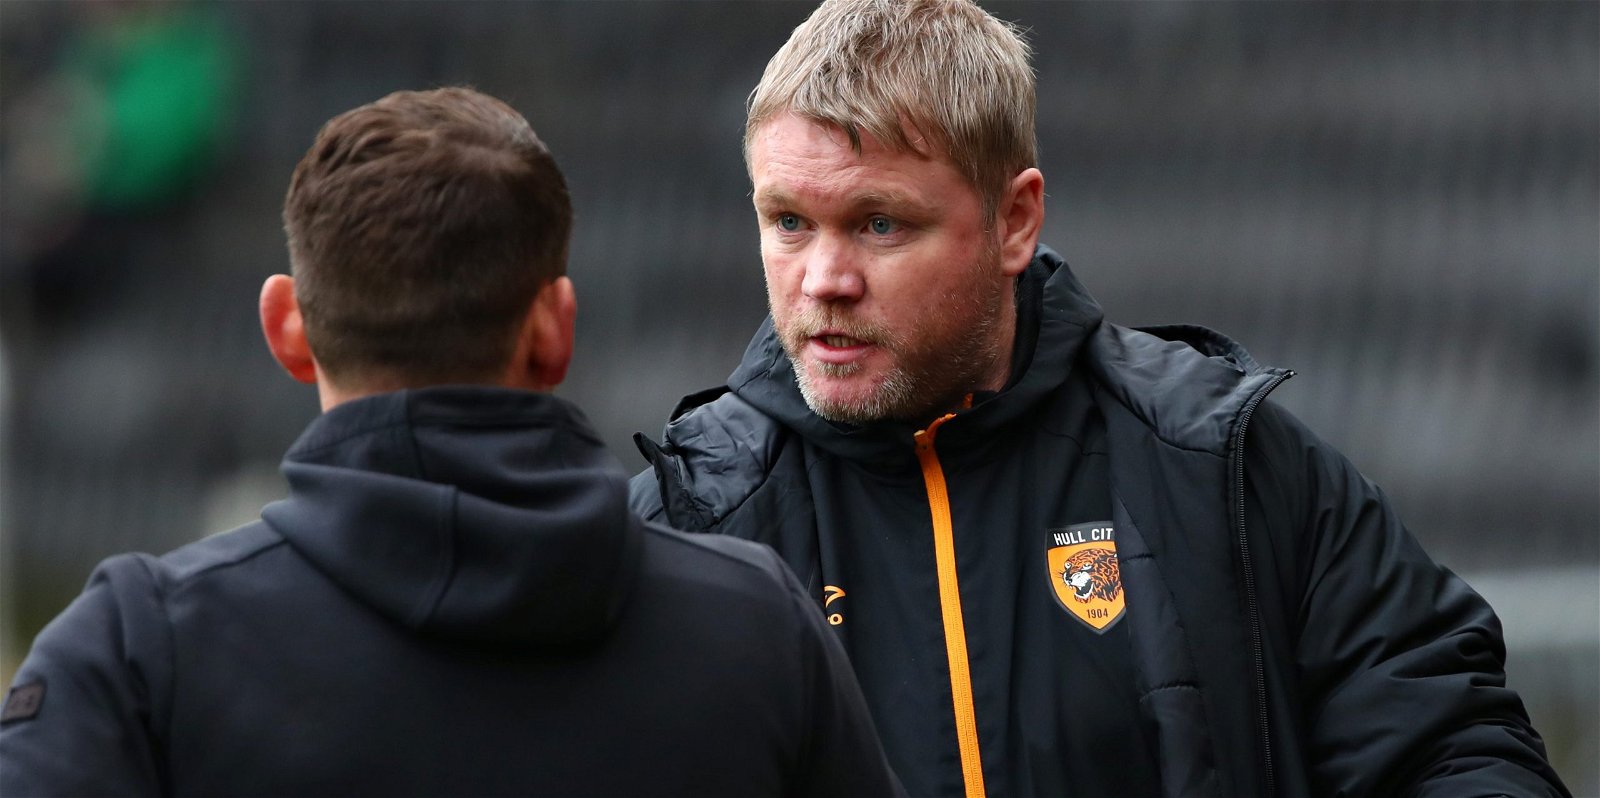 , &#8216;Lost the plot&#8217;, &#8216;Can&#8217;t be serious&#8217;- These Hull City fans slam McCann&#8217;s &#8216;formula is working&#8217; comments